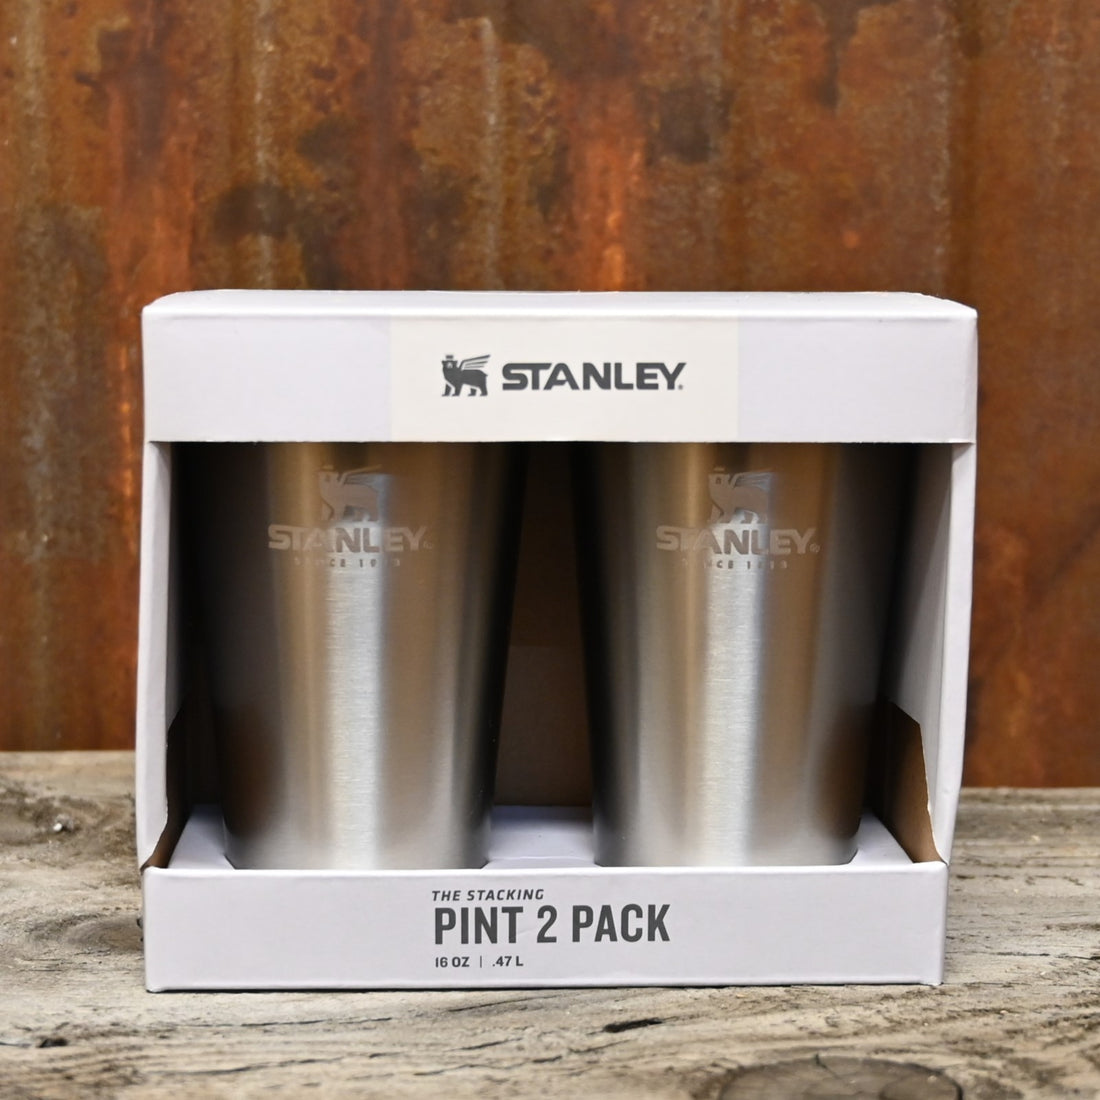 Stanley Adventure Stacking Beer Pint in Stainless Steel (2 pack) view of pints